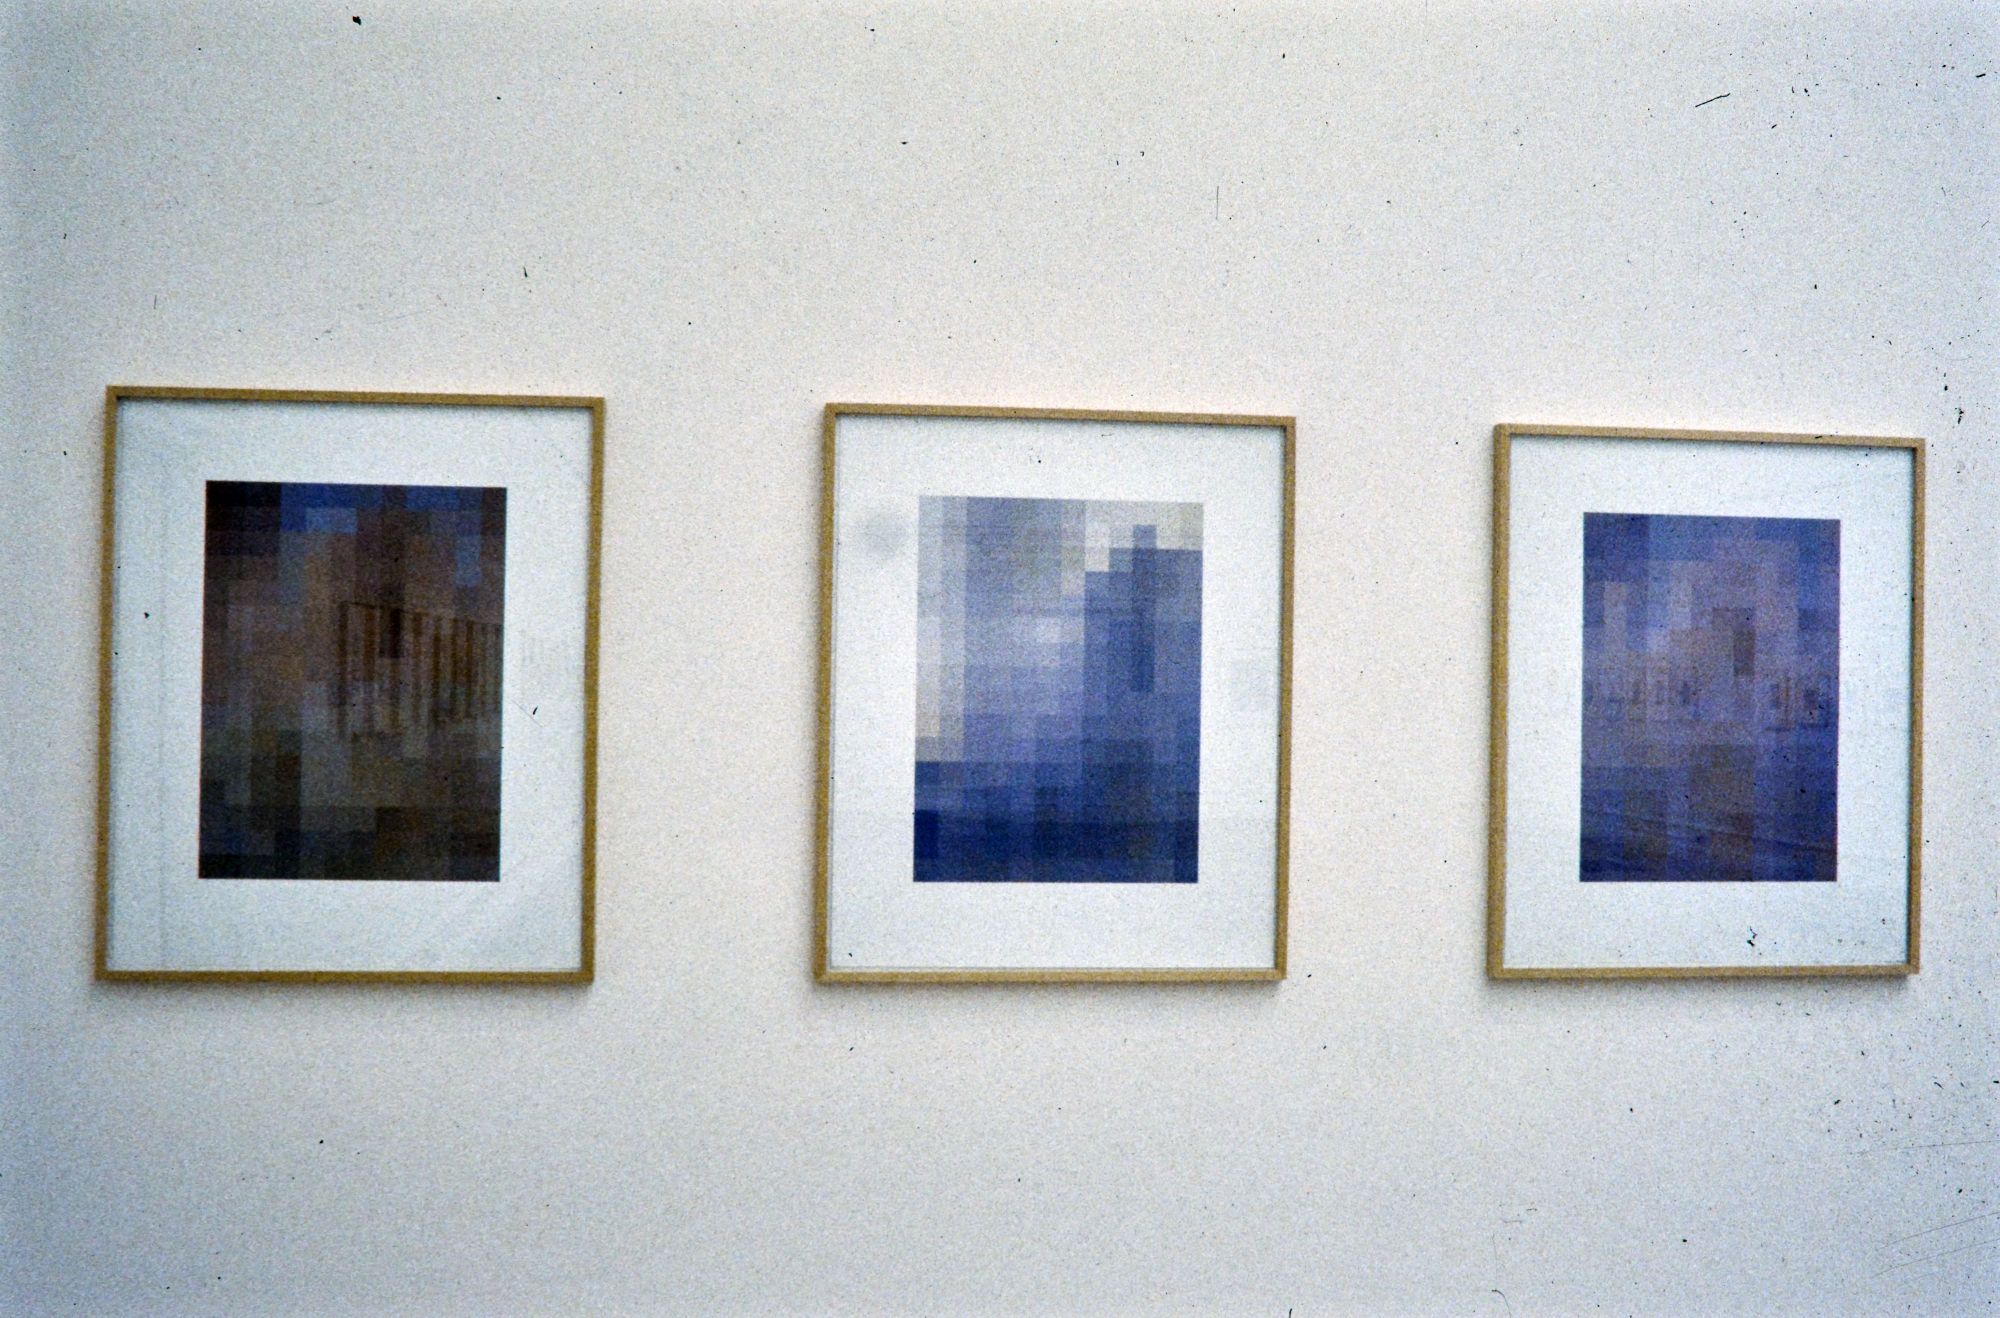 Exhibition: Sherrie Levine, 1996, slide 5 - South London Gallery Archive